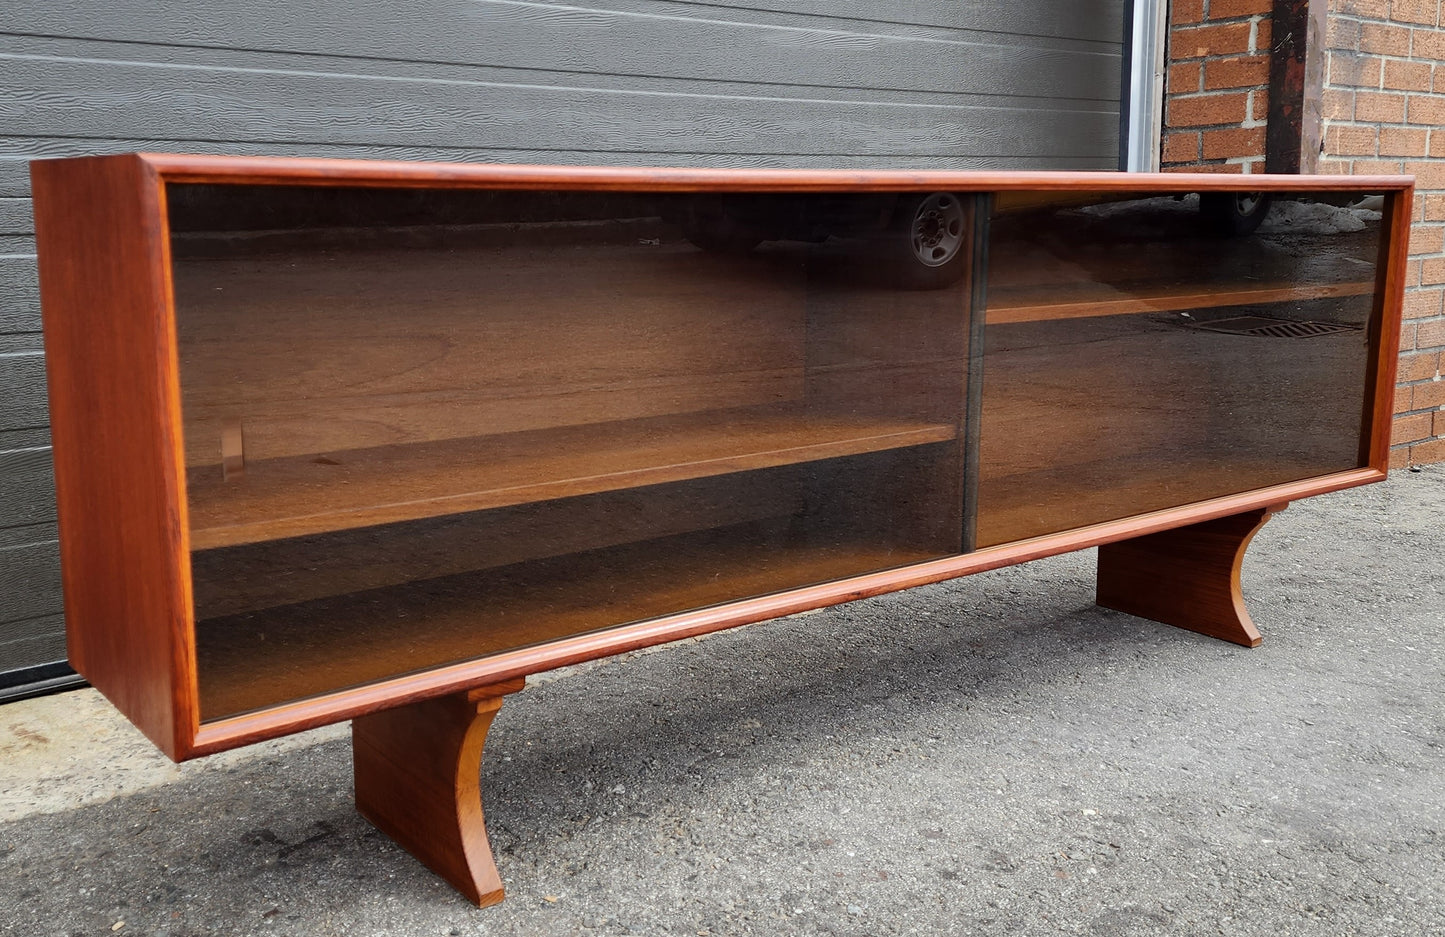 REFINISHED Danish Mid Century Modern Teak Console by Axel Christensen for ACO Møbler 71"